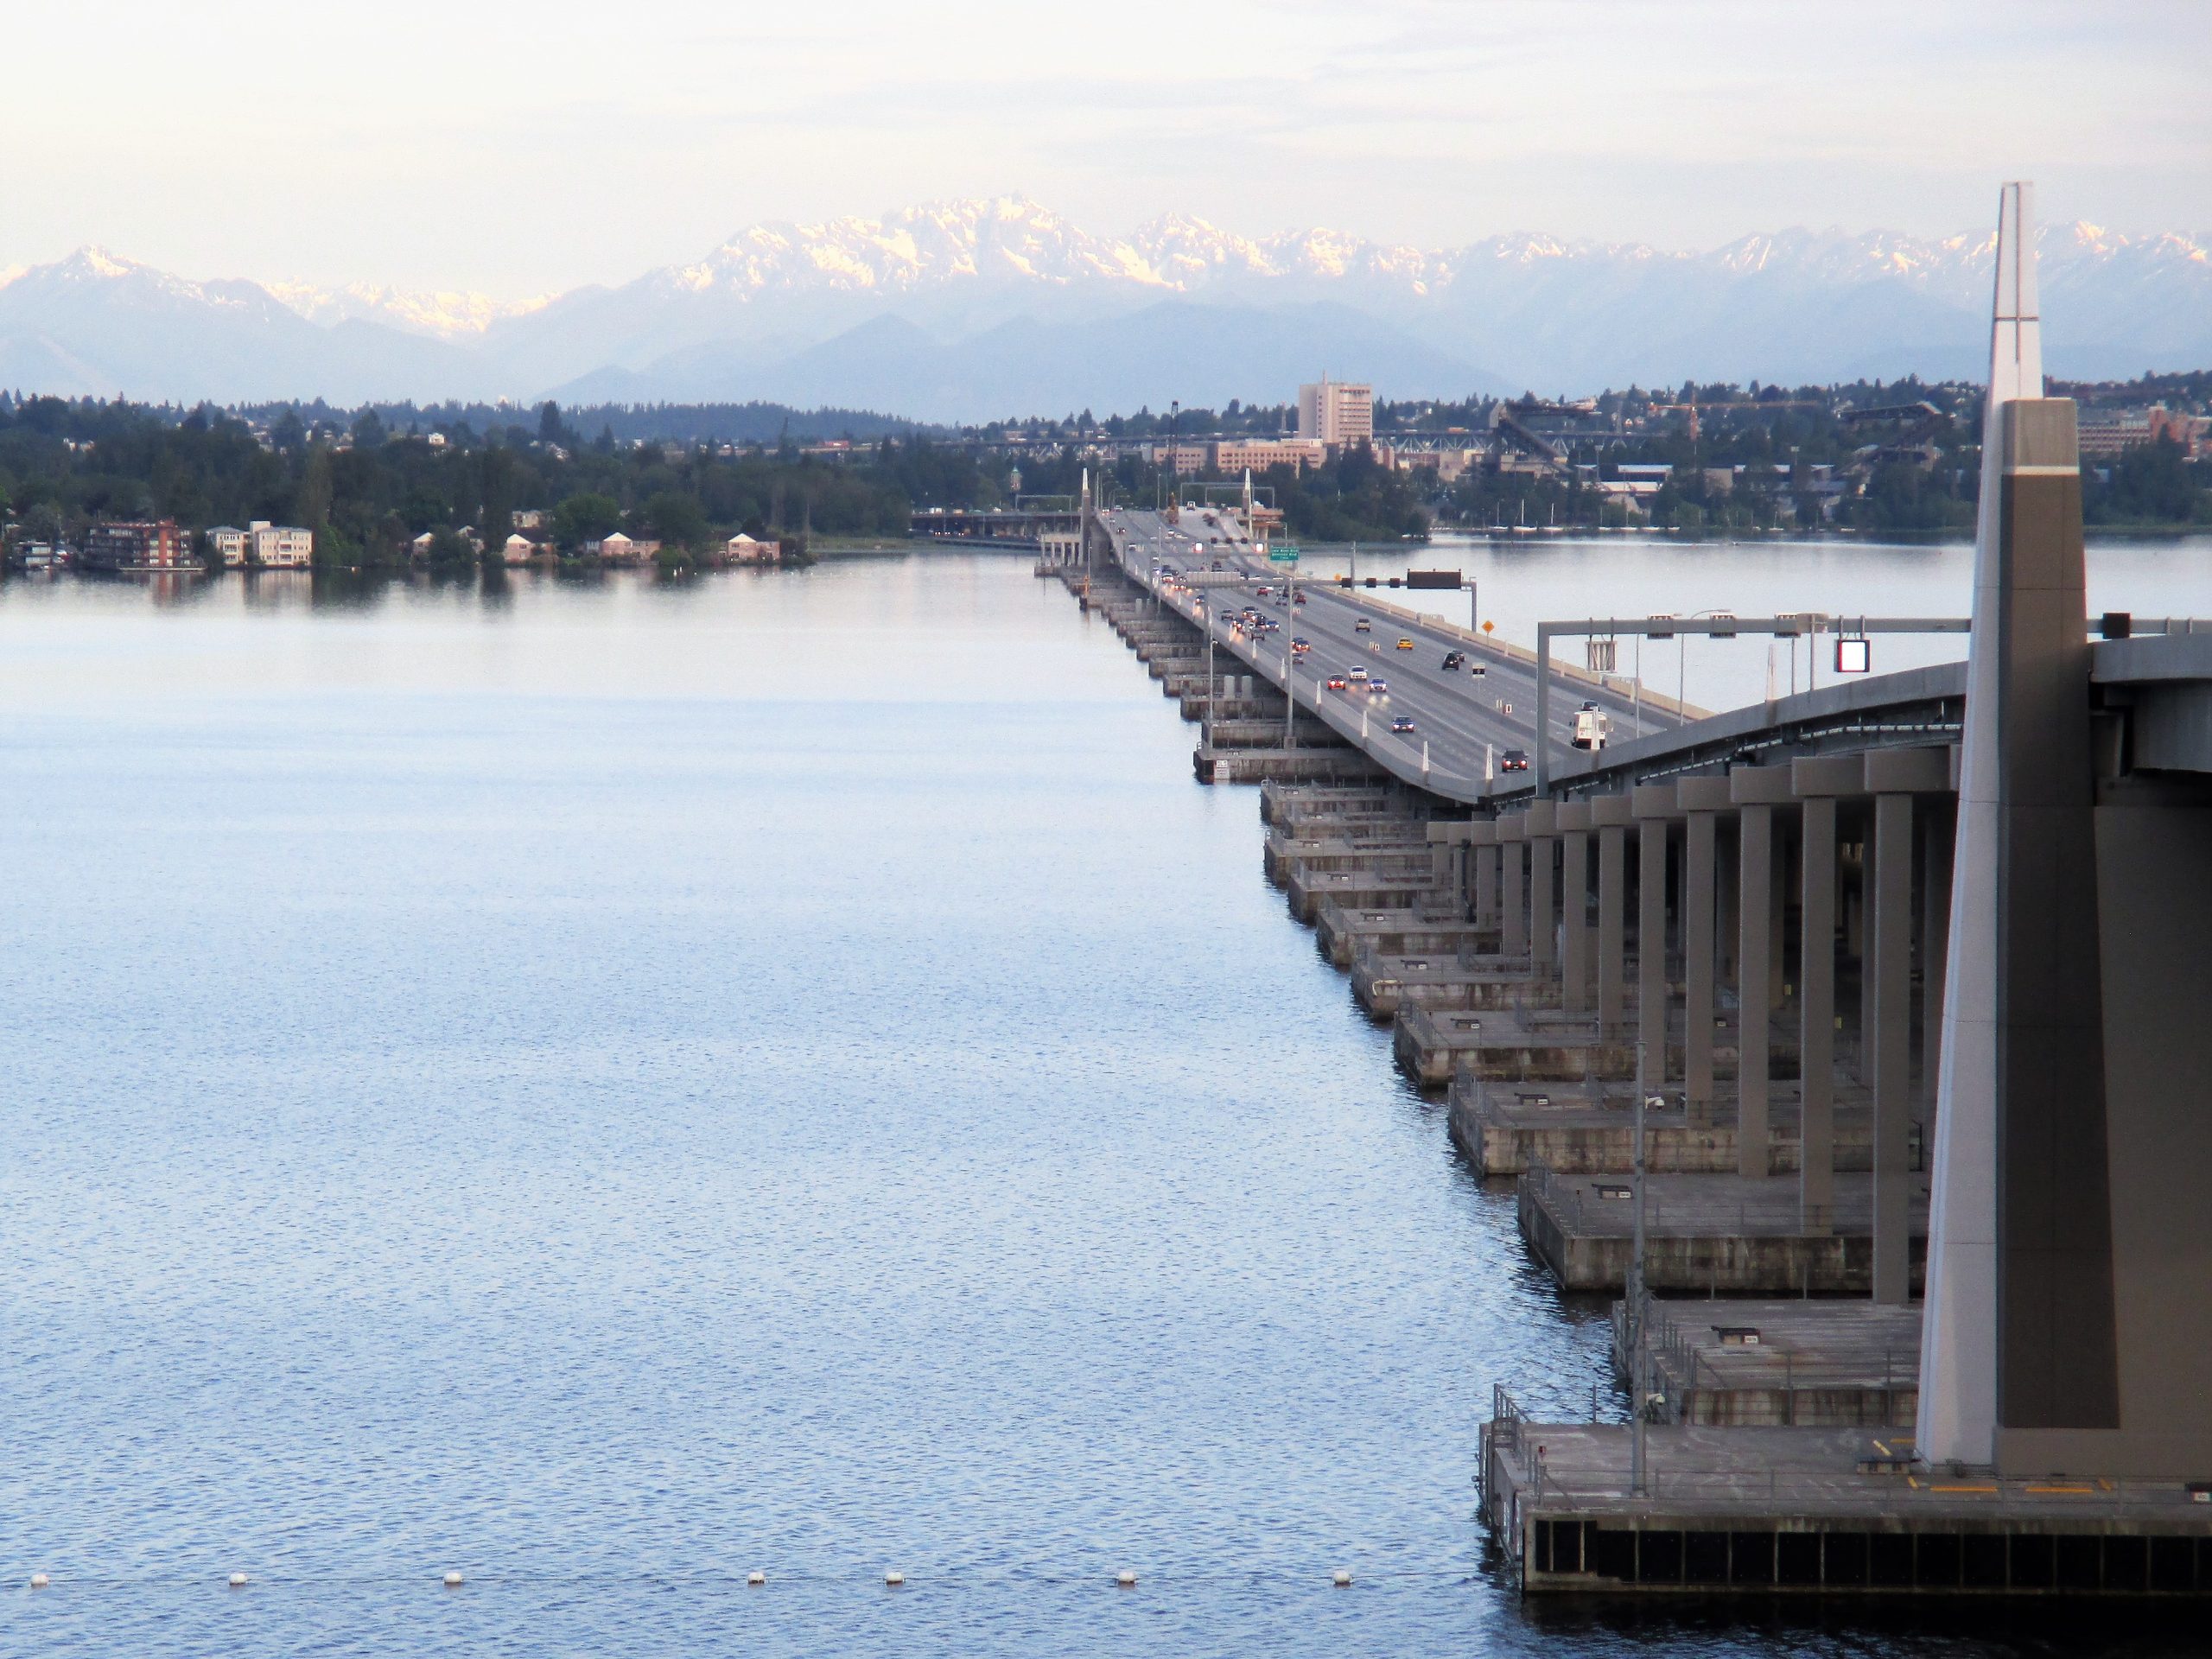 SR520 bridge with mountains in the background.